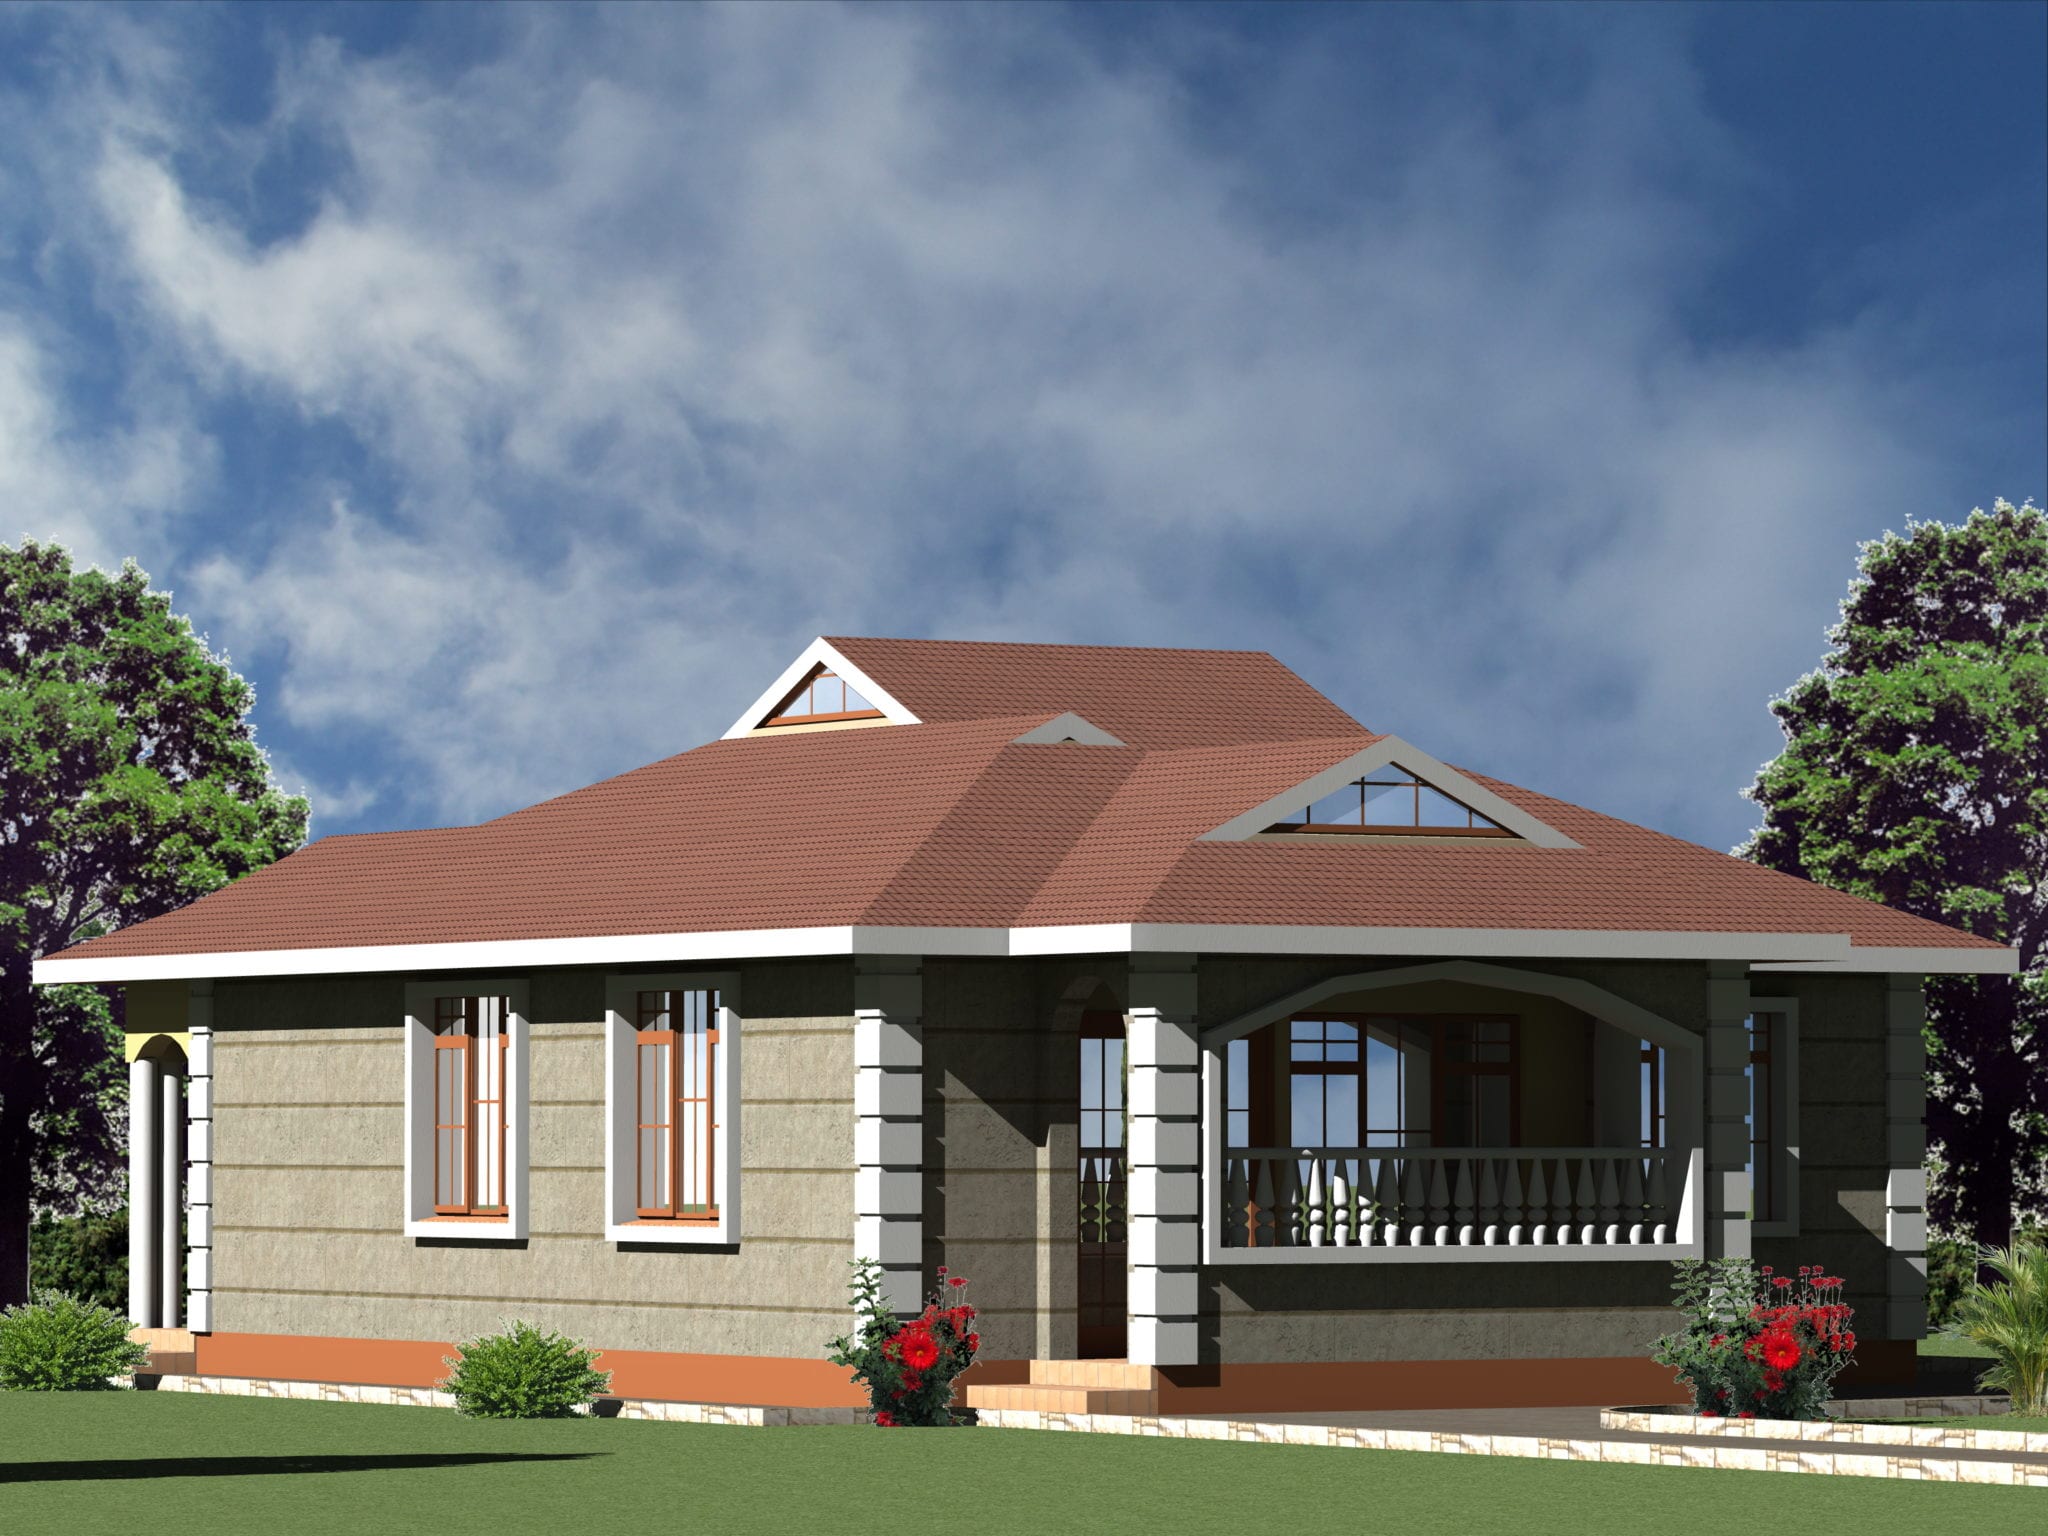 Simple & Small 3 bedroom house plan | HPD Consult